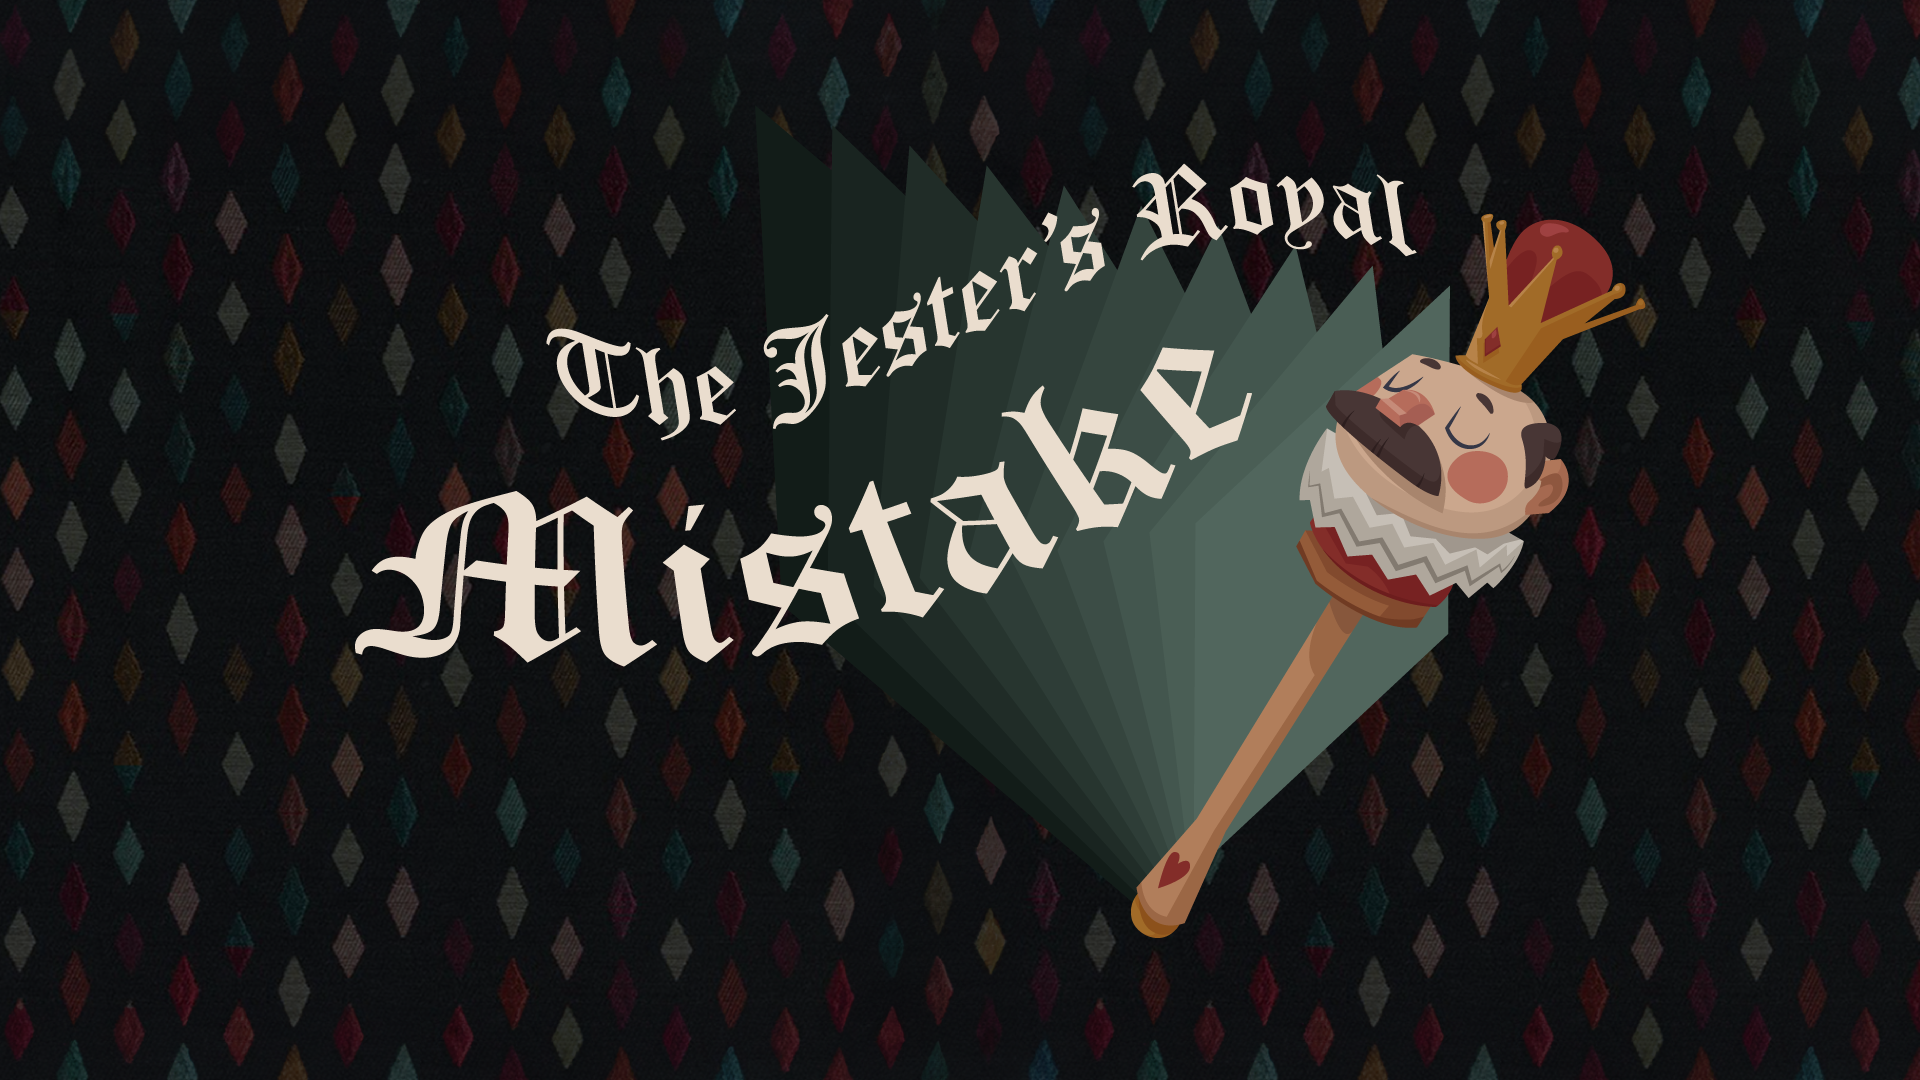 The Jester's Royal Mistake